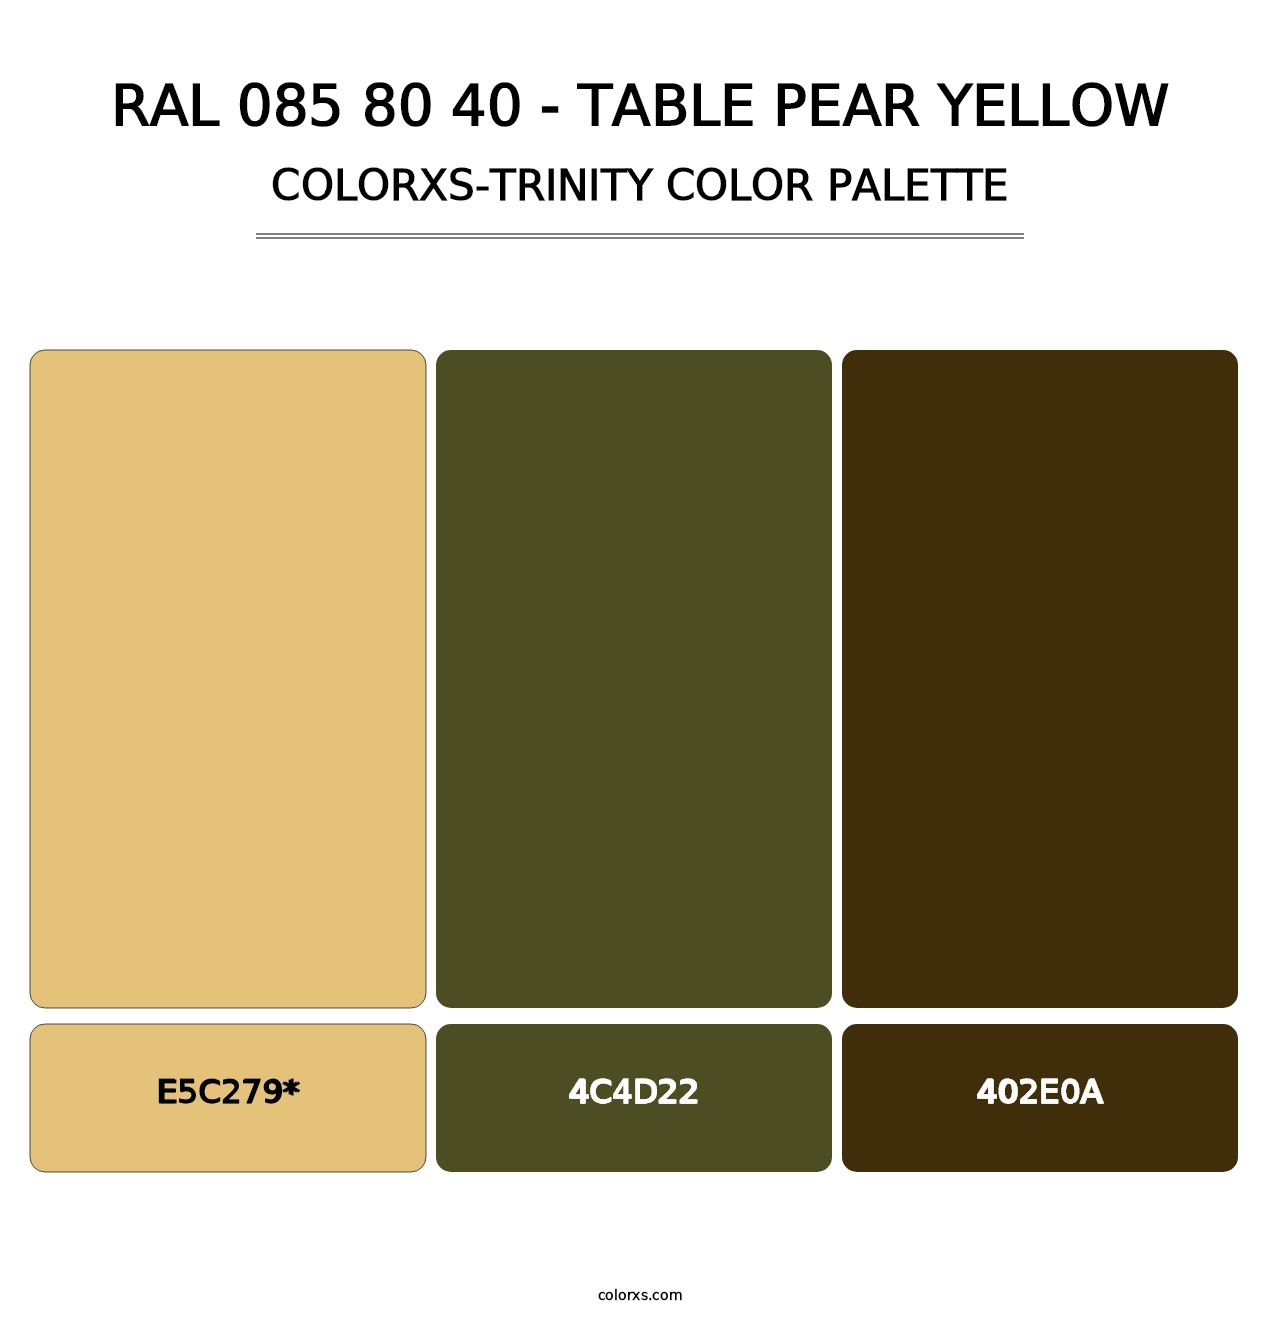 RAL 085 80 40 - Table Pear Yellow - Colorxs Trinity Palette